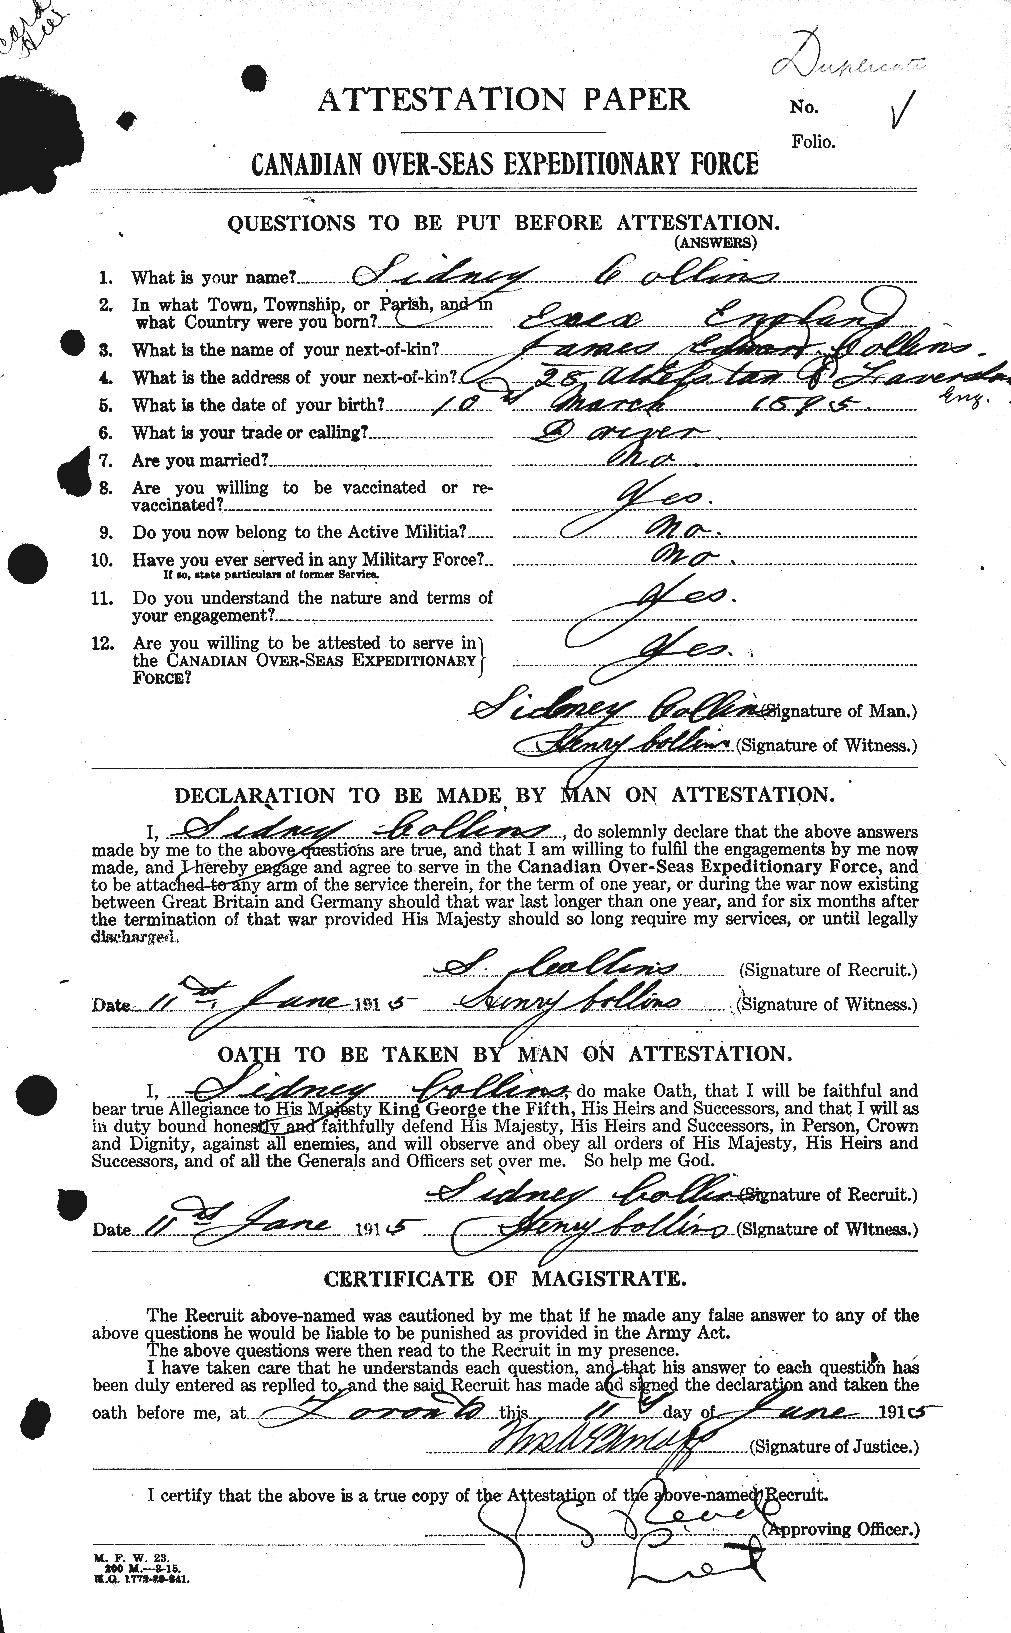 Personnel Records of the First World War - CEF 069157a